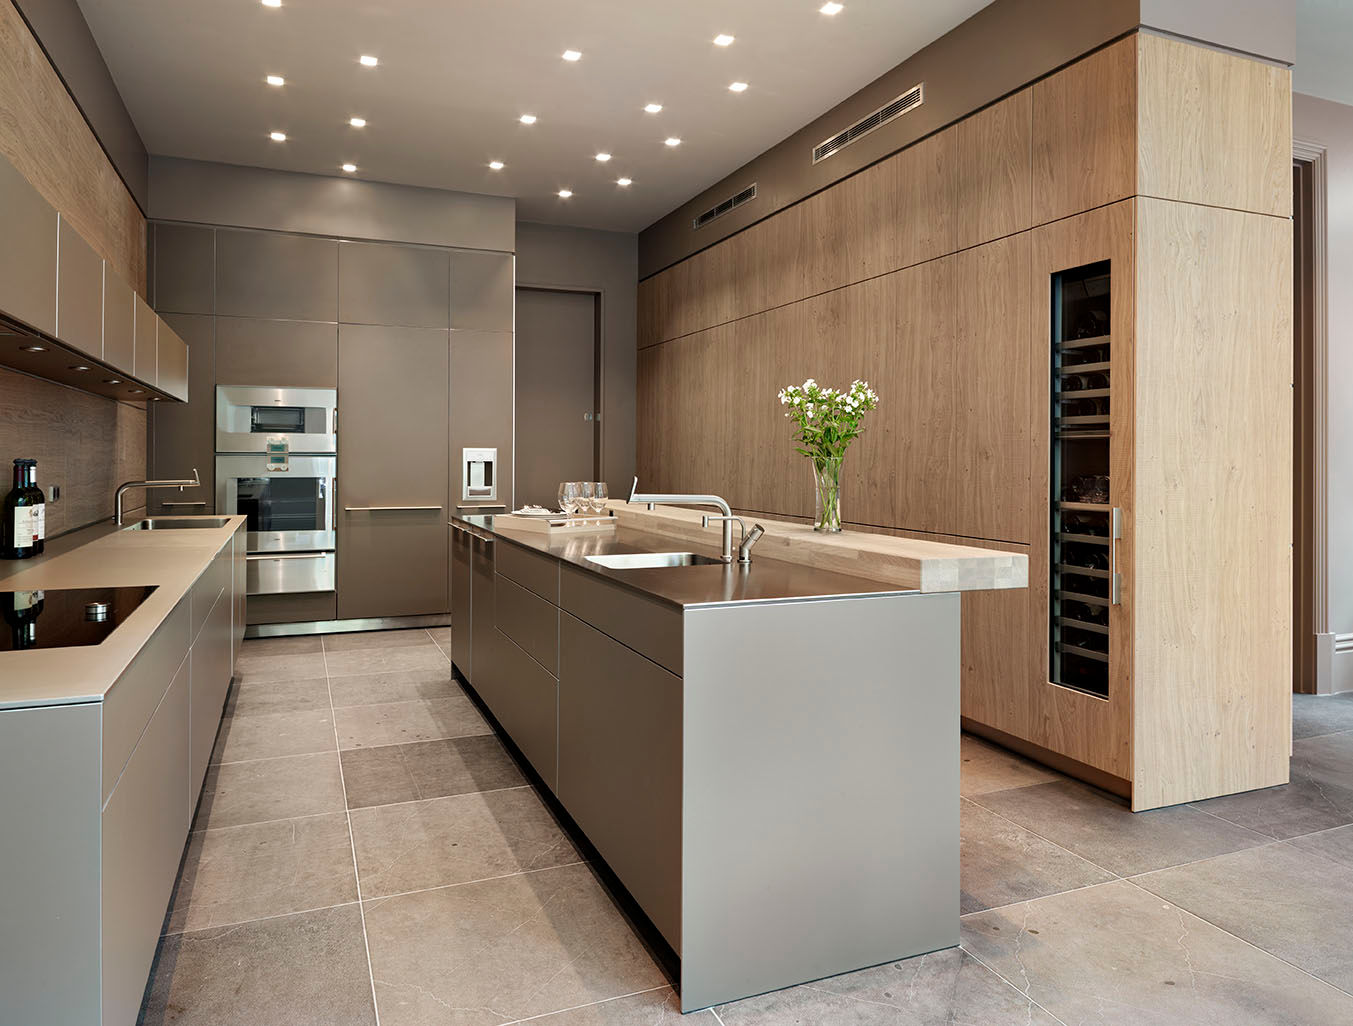 Grand dining Kitchen Architecture ห้องครัว kitchen architecture,bulthaup,bulthaup b3,bespoke kitchen,contemporary kitchen,kitchen island,breakfast bar,integrated kitchen,integrated appliance,wine cooler,gagganau,sociable living